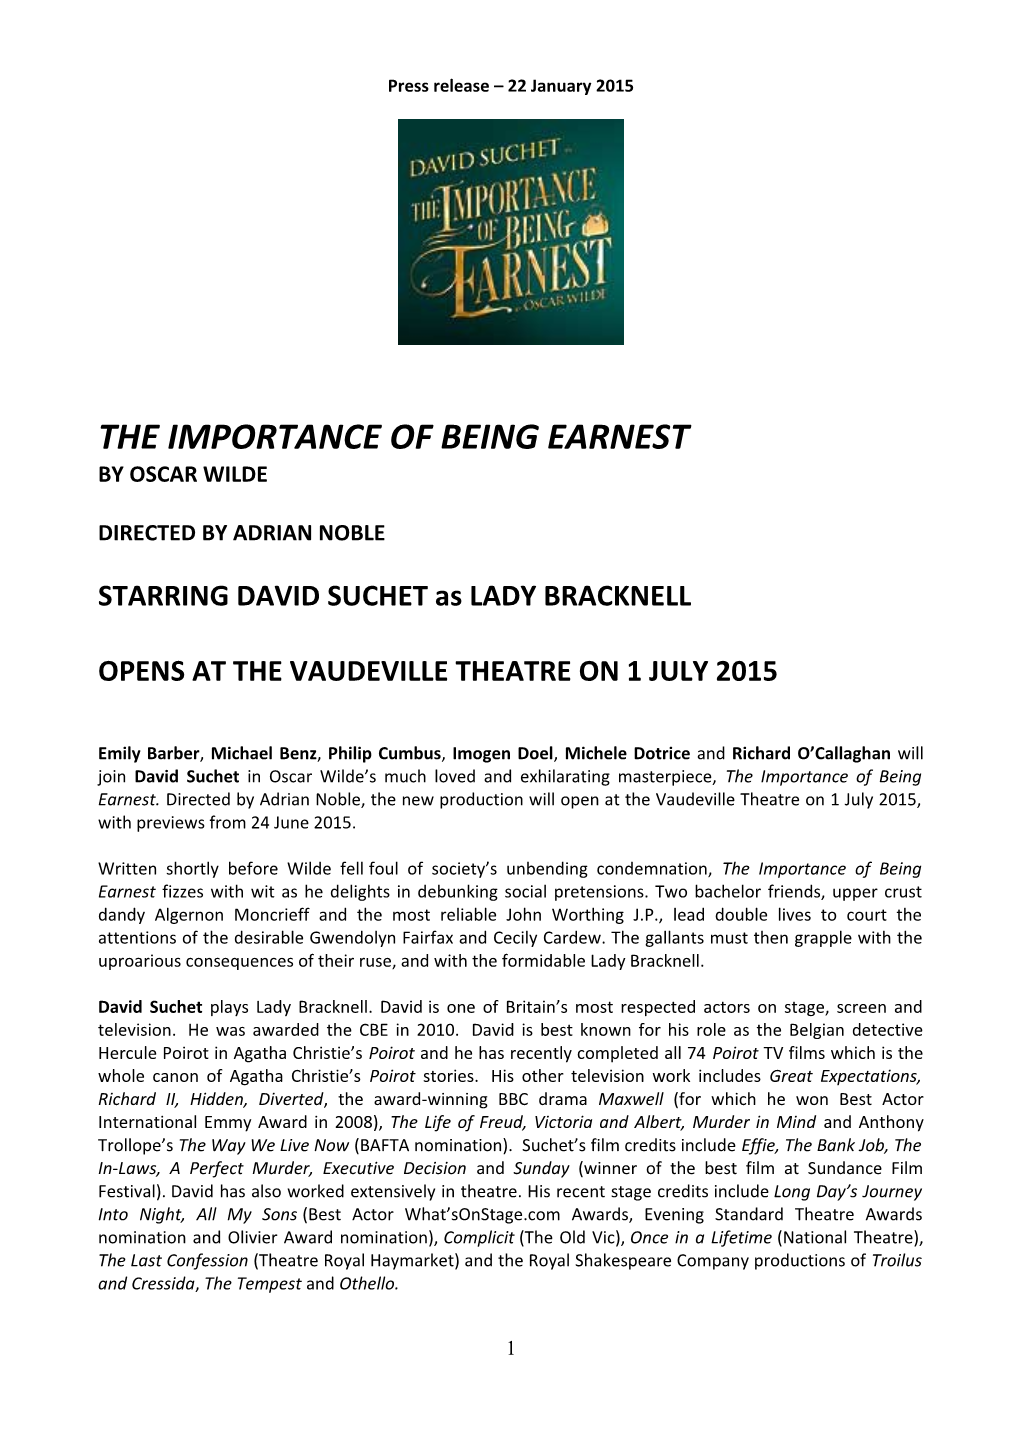 Theimportance of Being Earnest